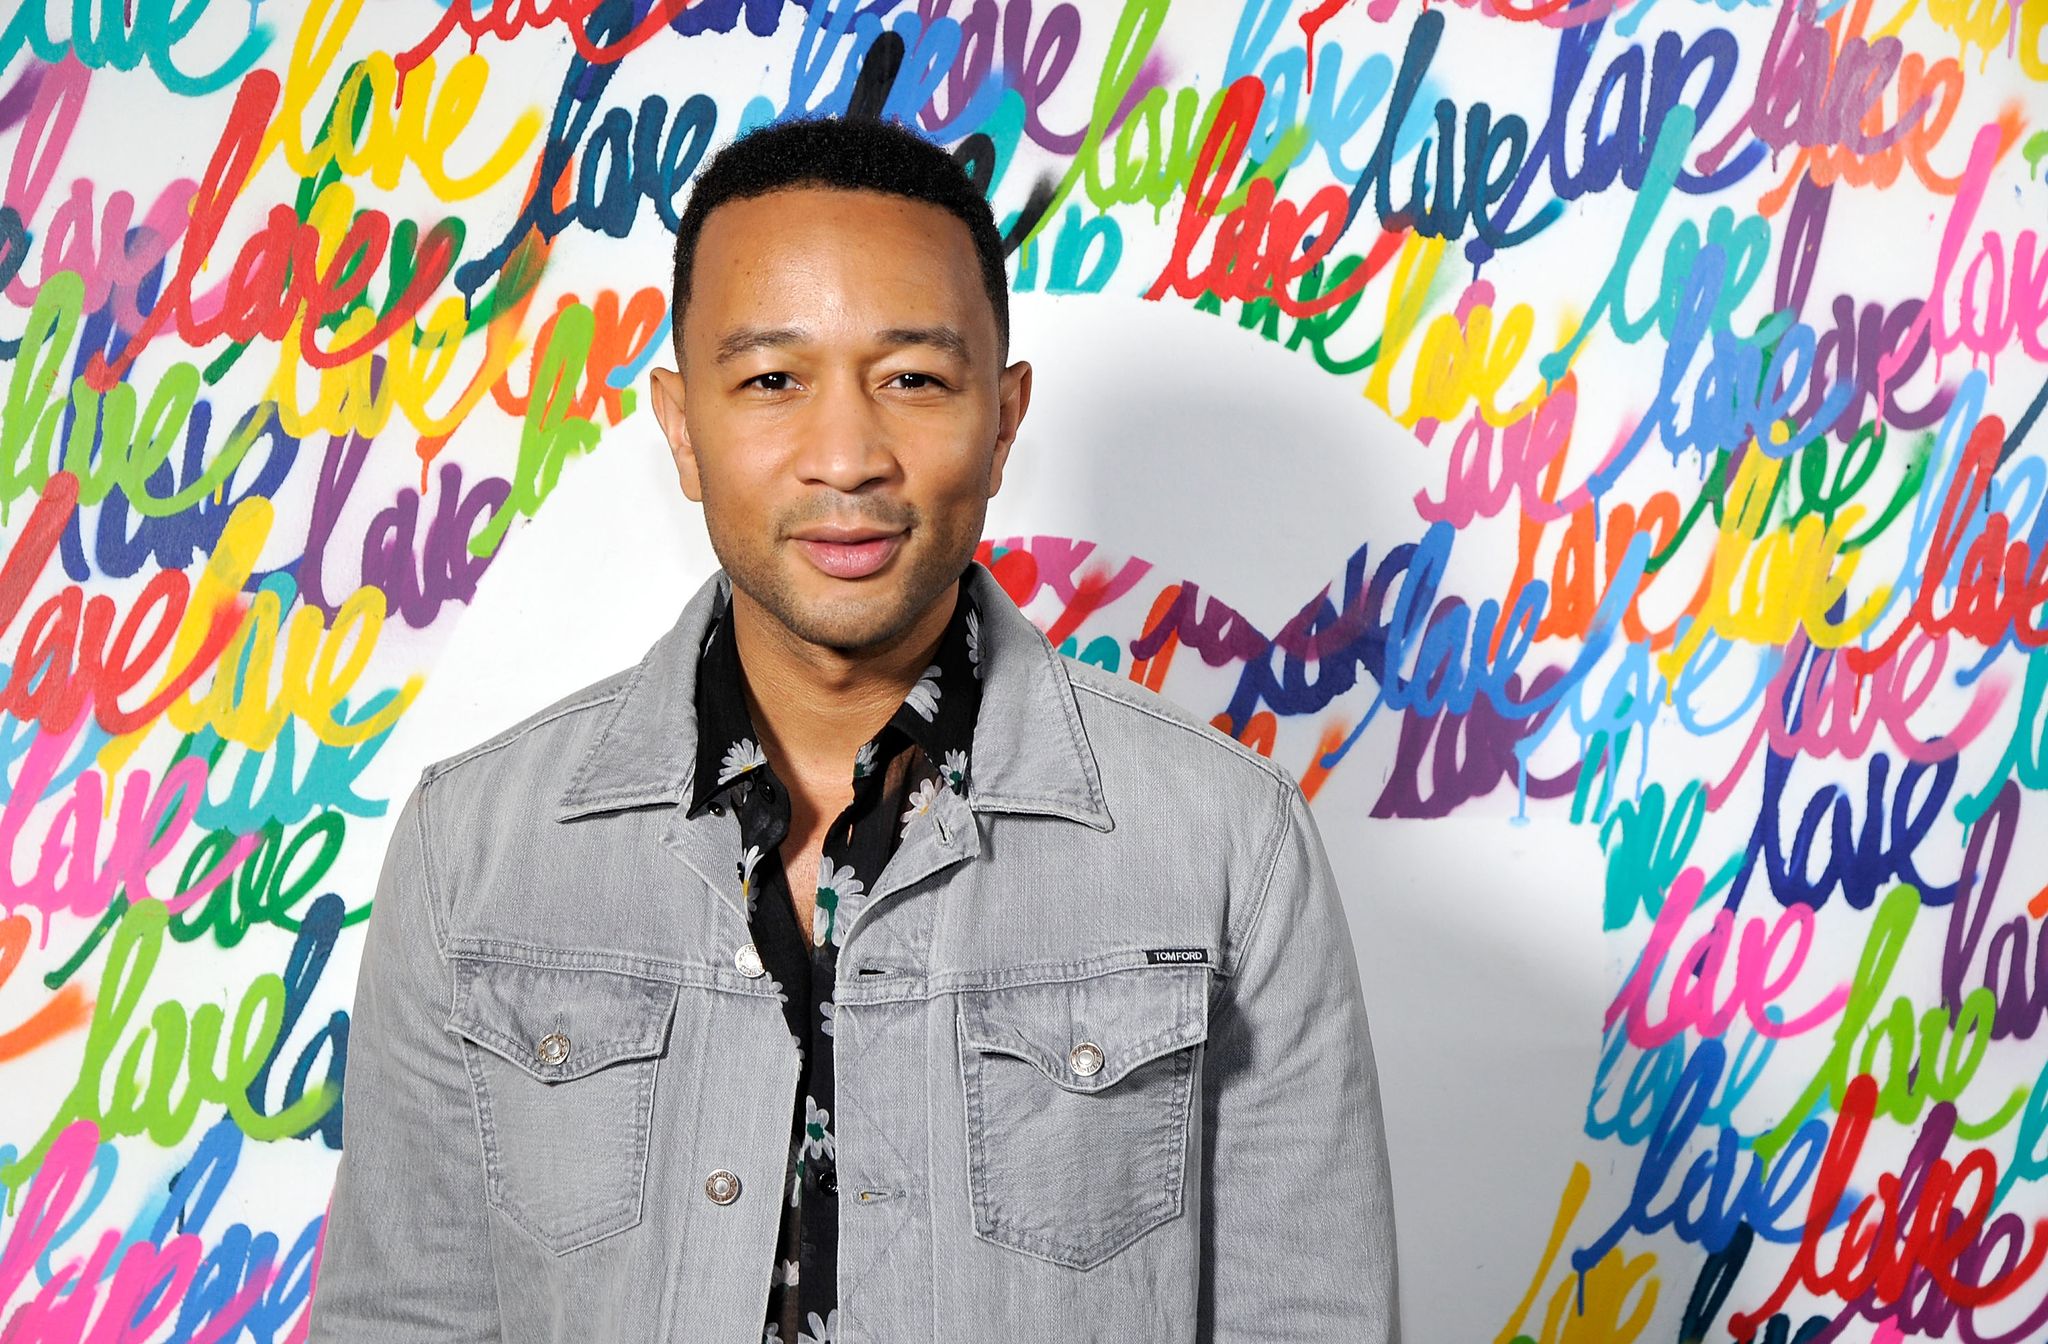 Music artist John Legend attending the Google premiere of his music video 'A Good Night,' filmed entirely on Google Pixel 2 on April 5, 2018 in California. | Photo: Getty Images.